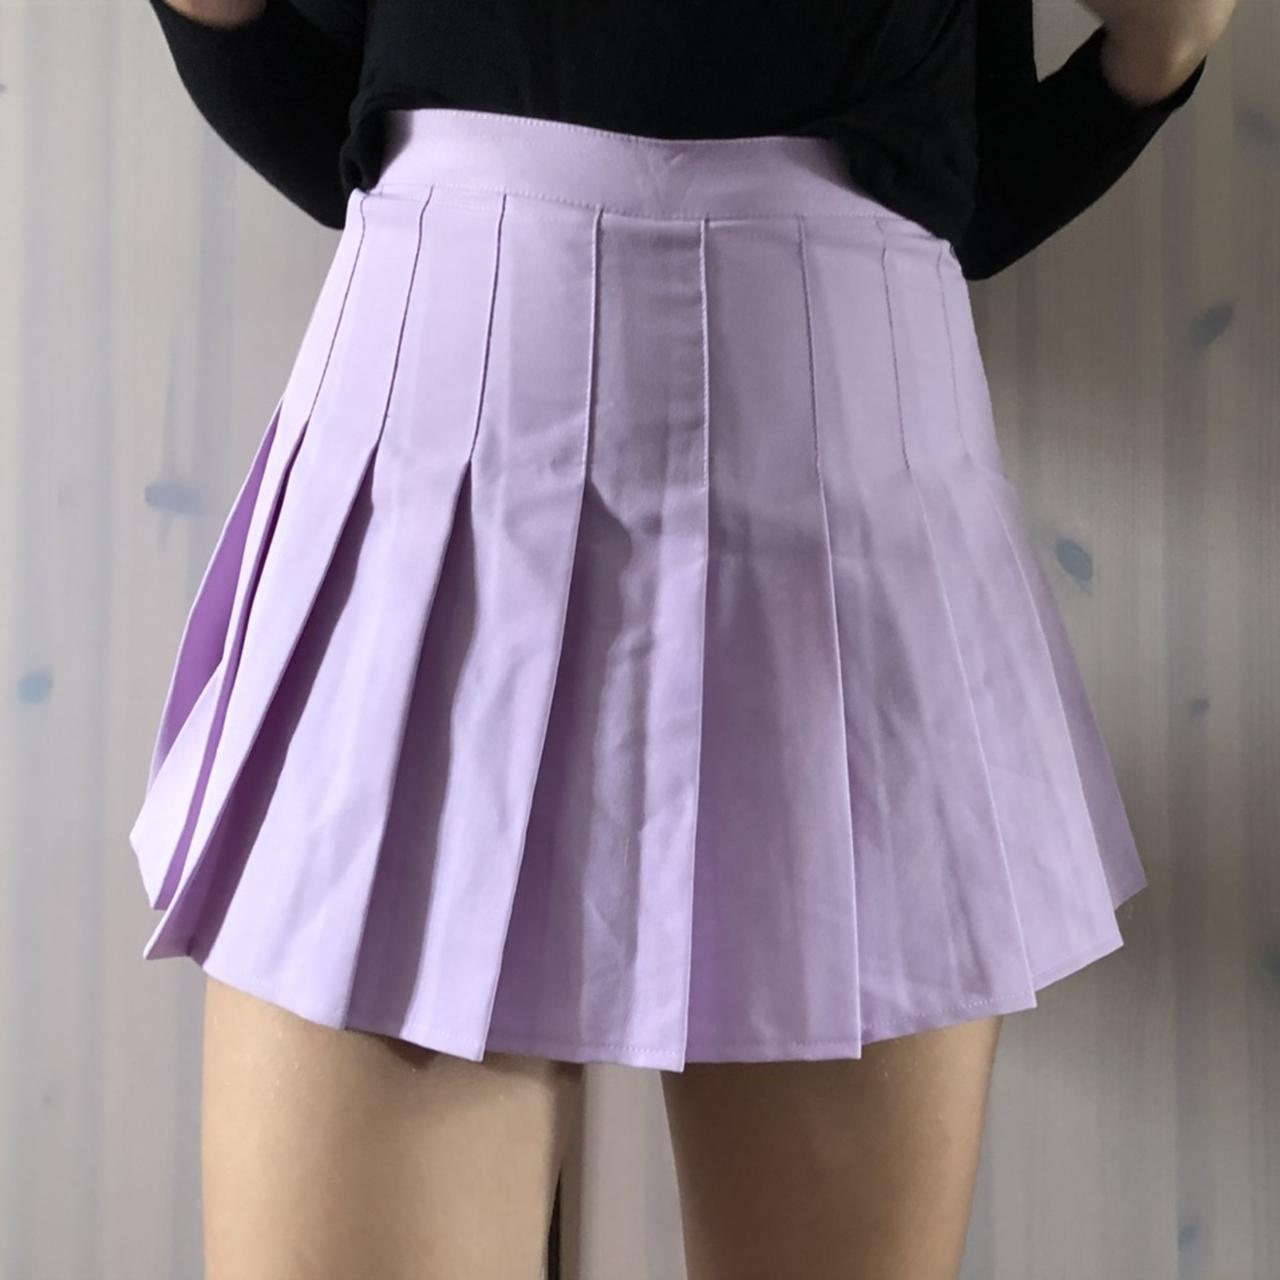 cute, lilac softgirl skirt 💜 It’s in a very good... - Depop